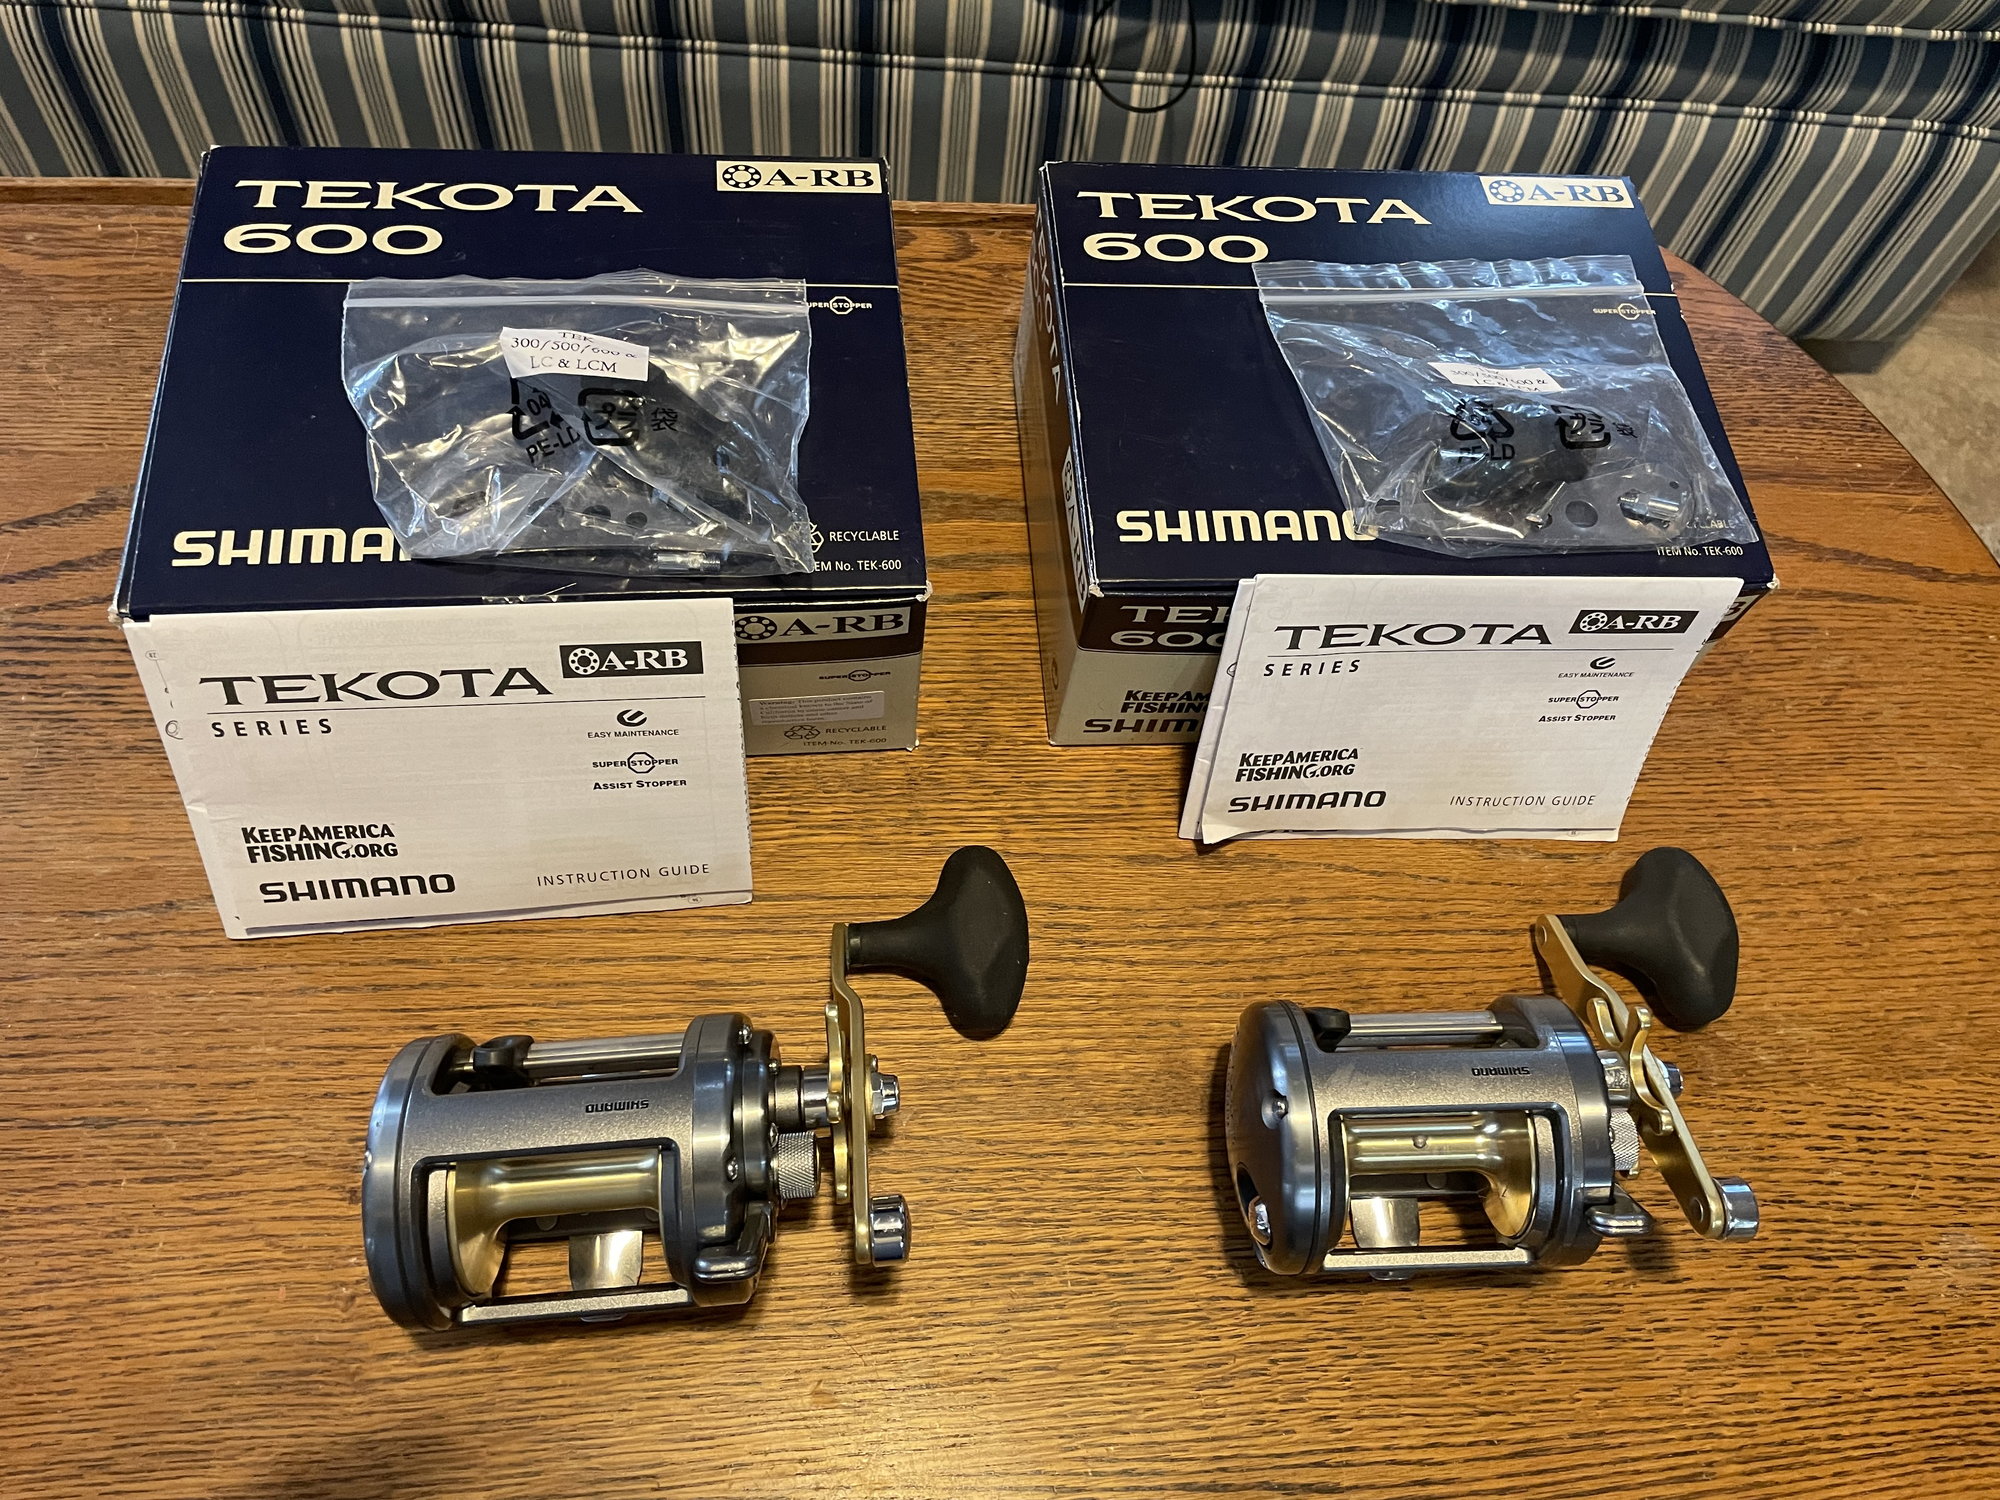 Shimano Tekota 600 pair for sale - almost perfect condition - The